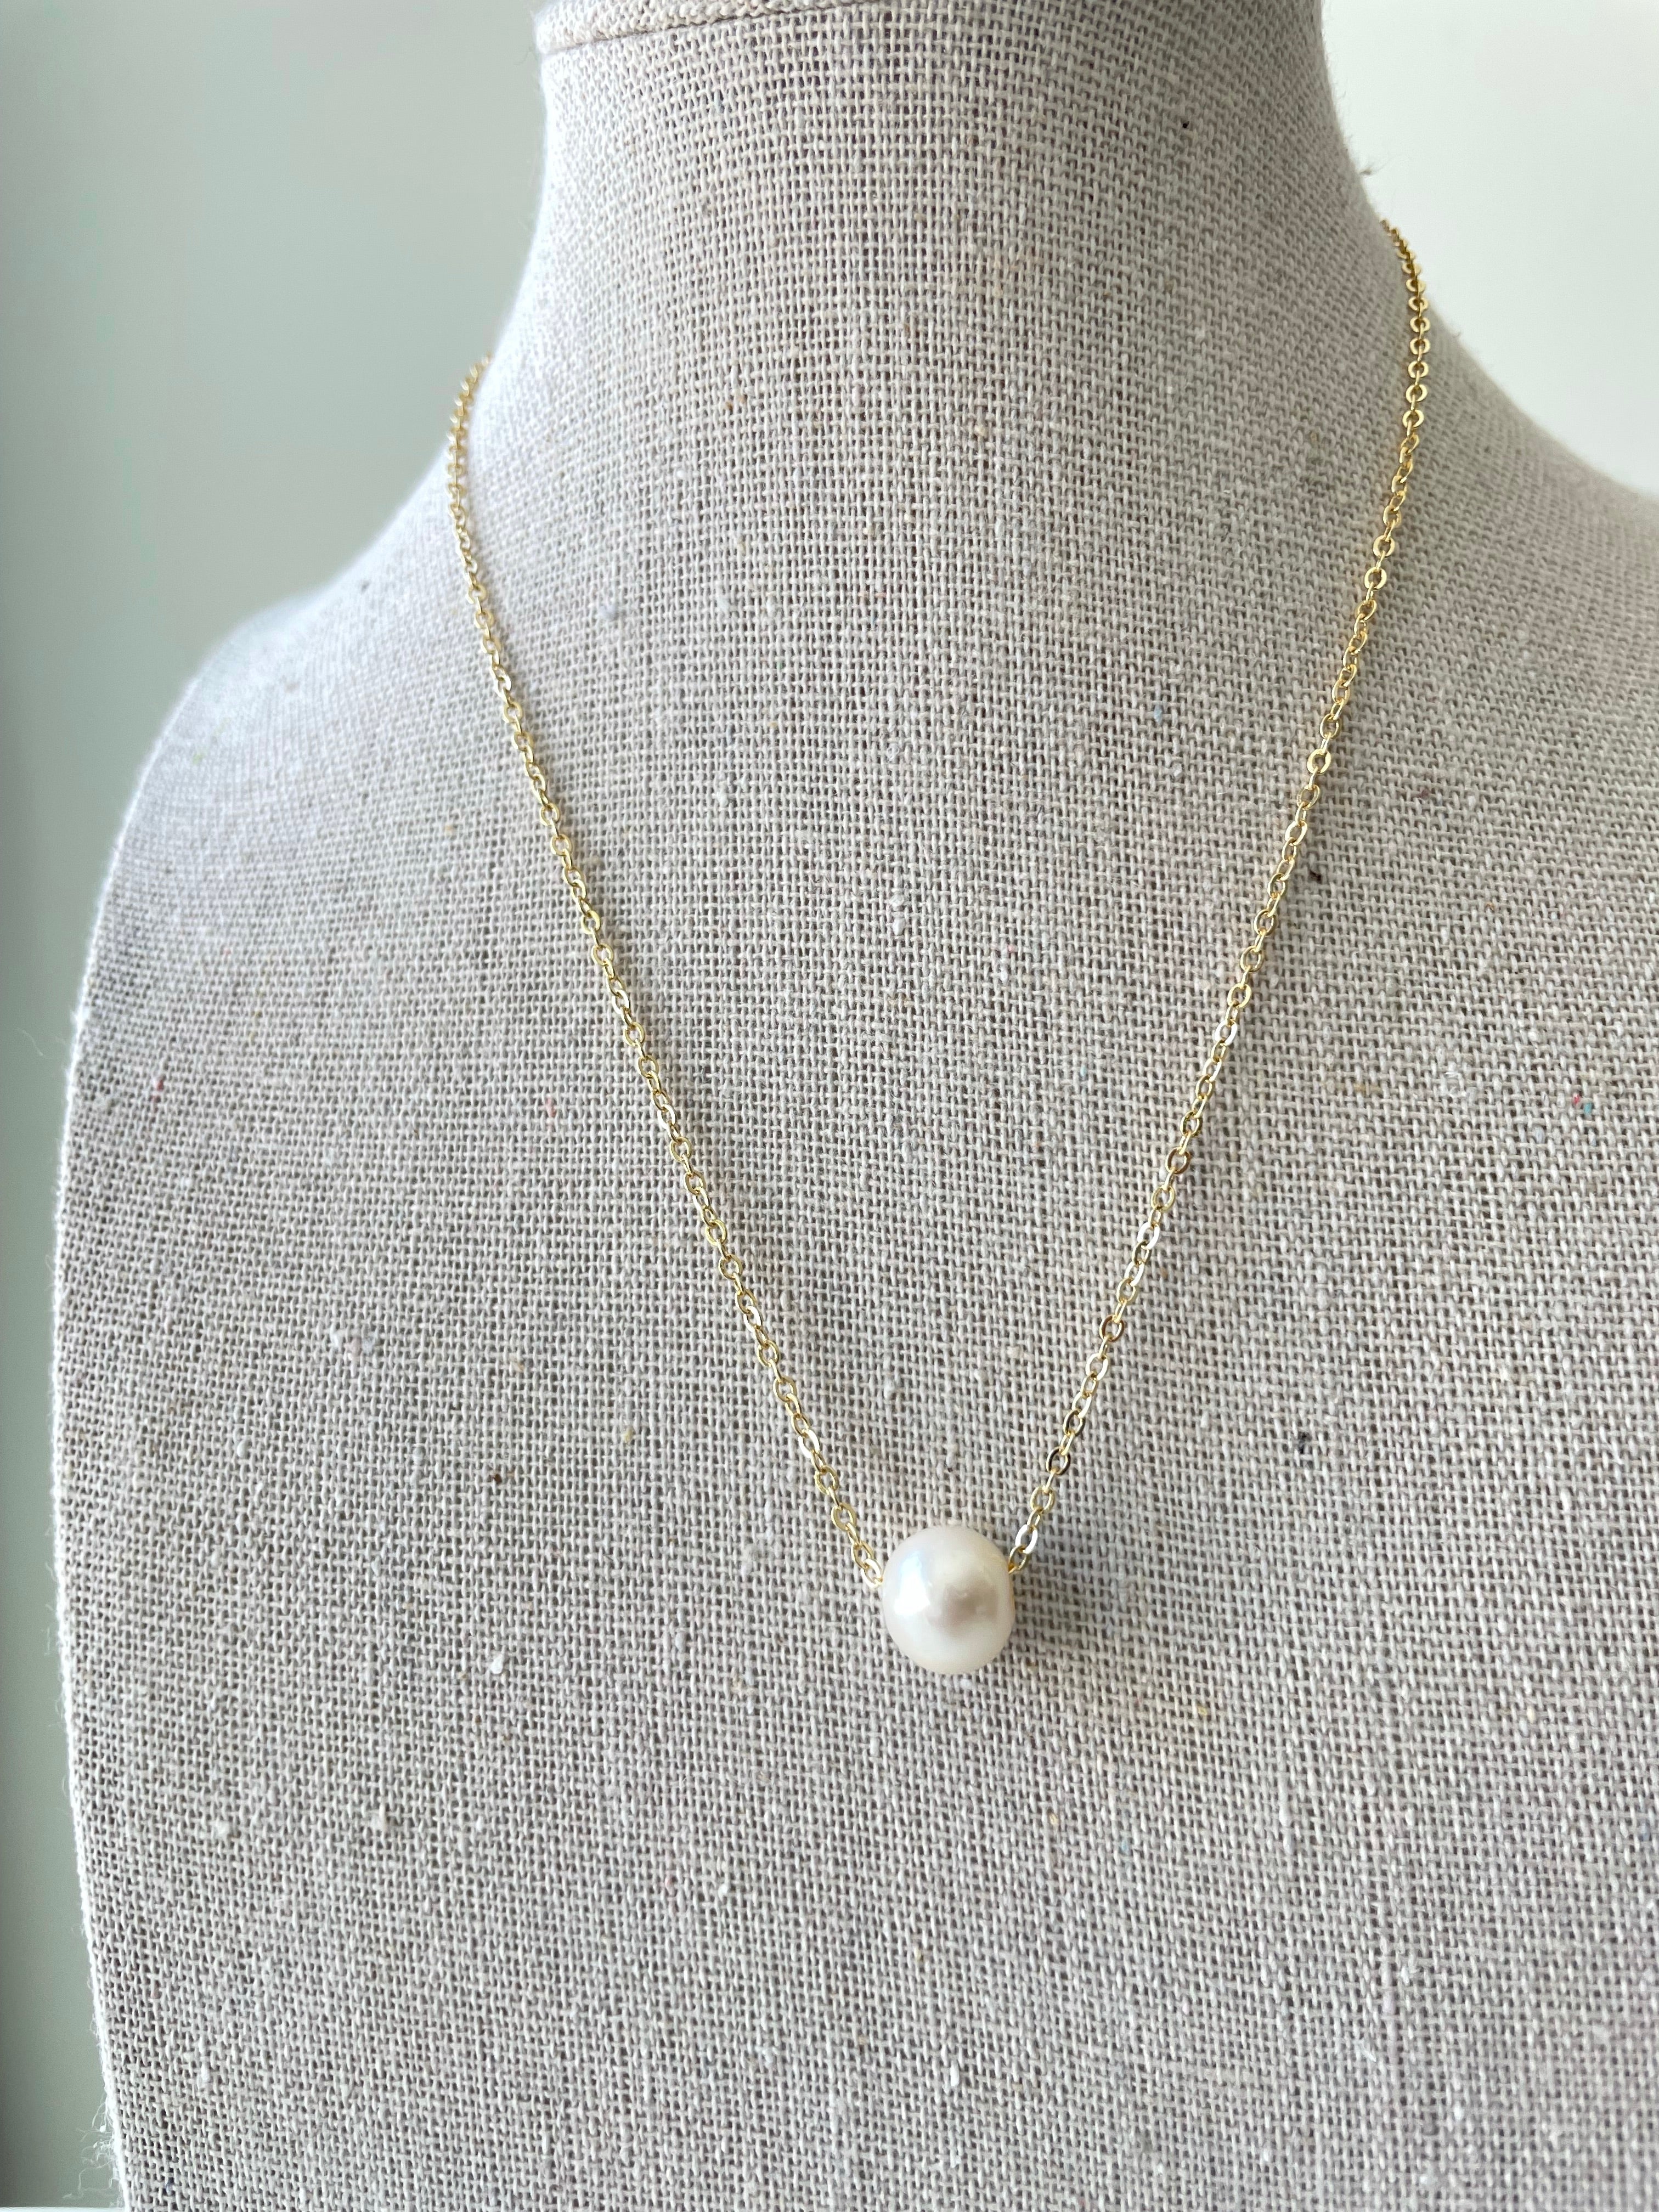 Pearl Necklace on Dainty Gold Chain